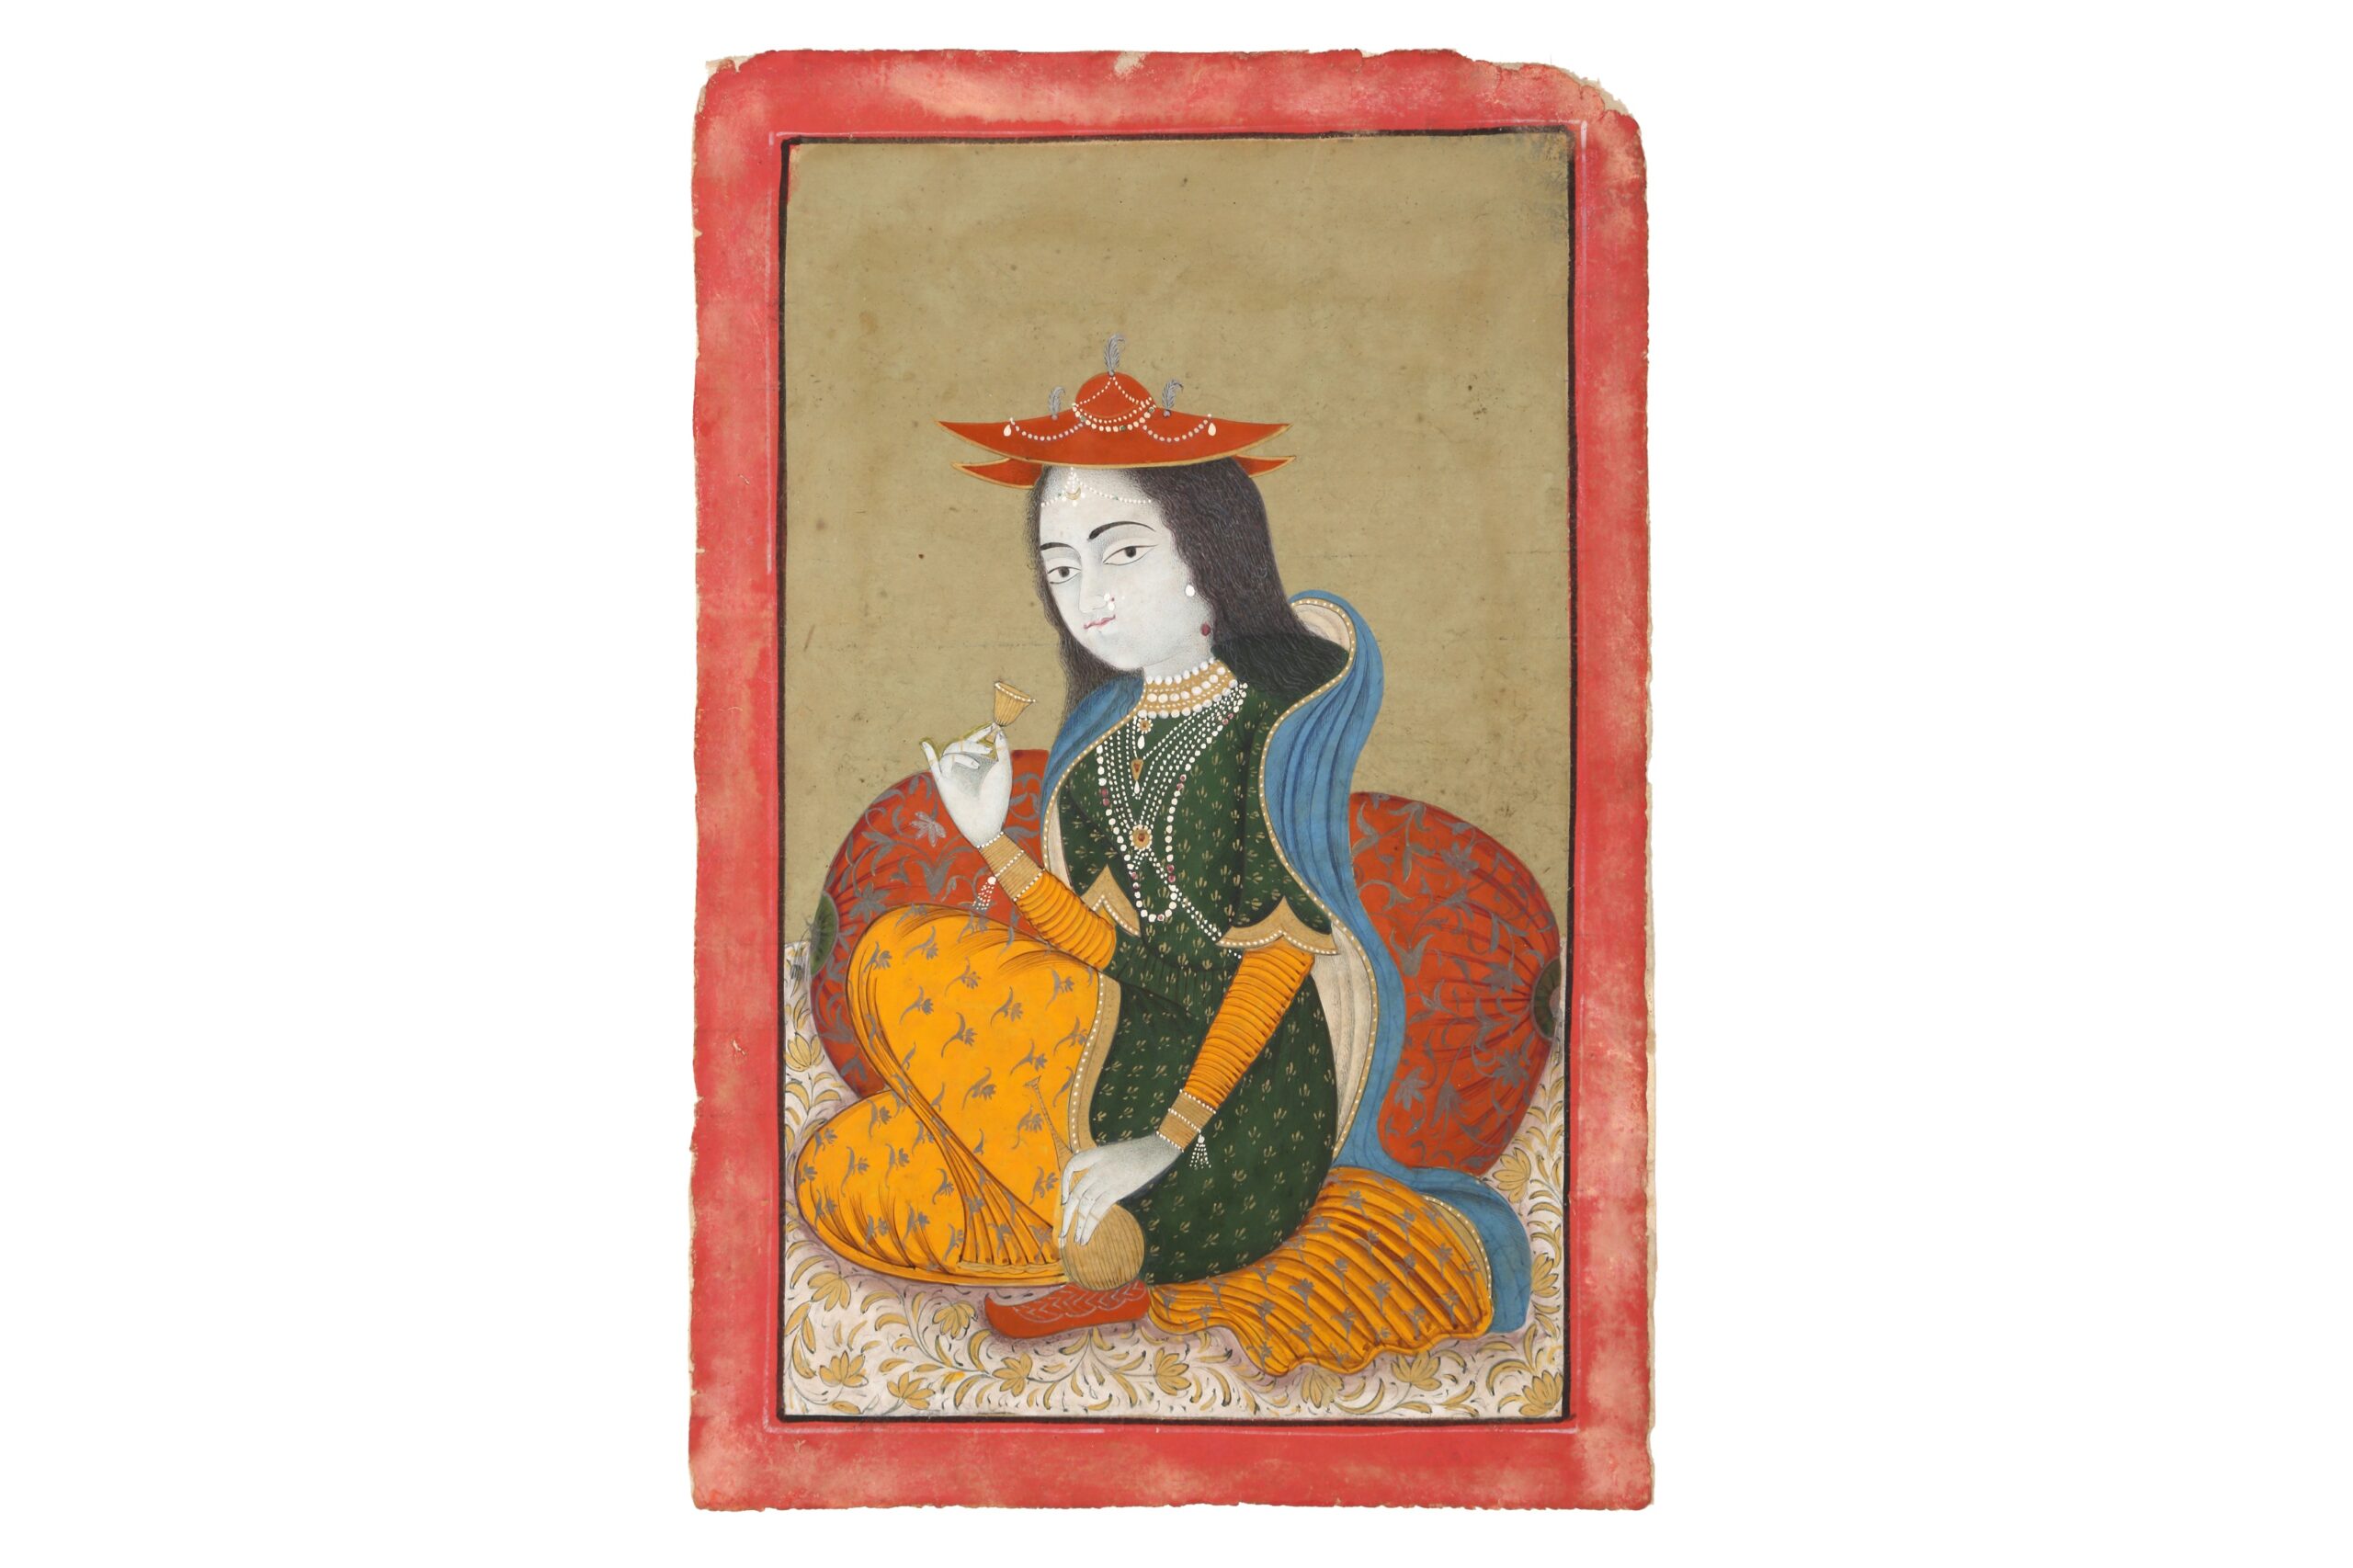 Lot 590. A PORTRAIT OF AN INDIAN MAIDEN WEARING A DUTCH BONNET Kotah or Bundi, Rajasthan, North-Western India, late 18th - early 19th century. Estimate £2,000 - £3,000 